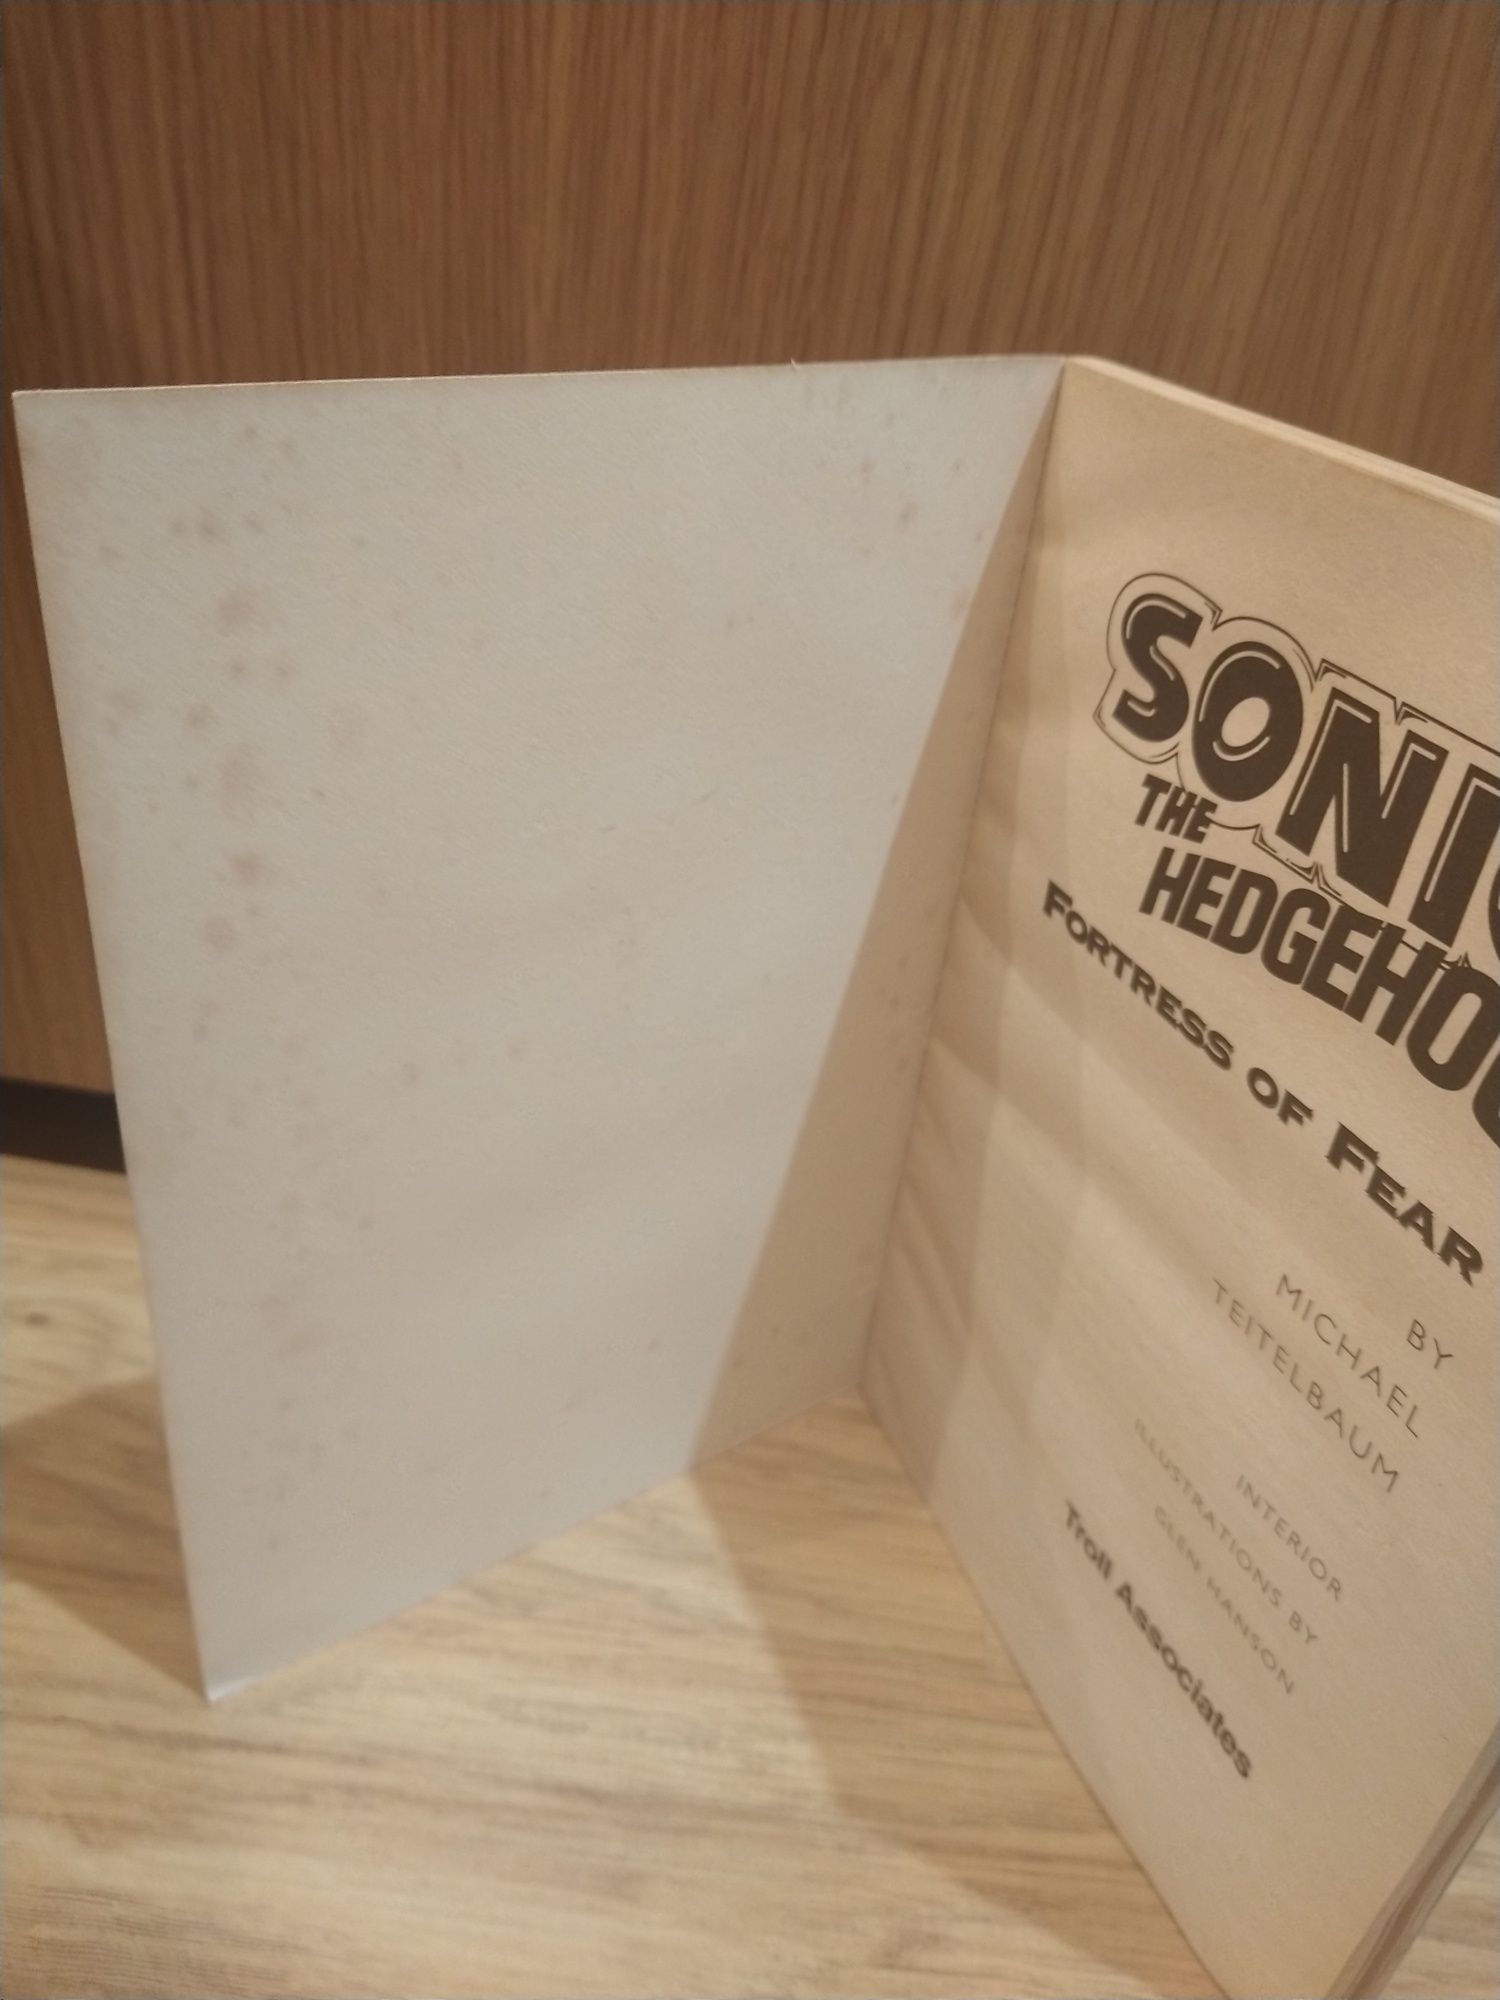 Novel Sonic The Hedgeog de 1995 - Fortress of Fear